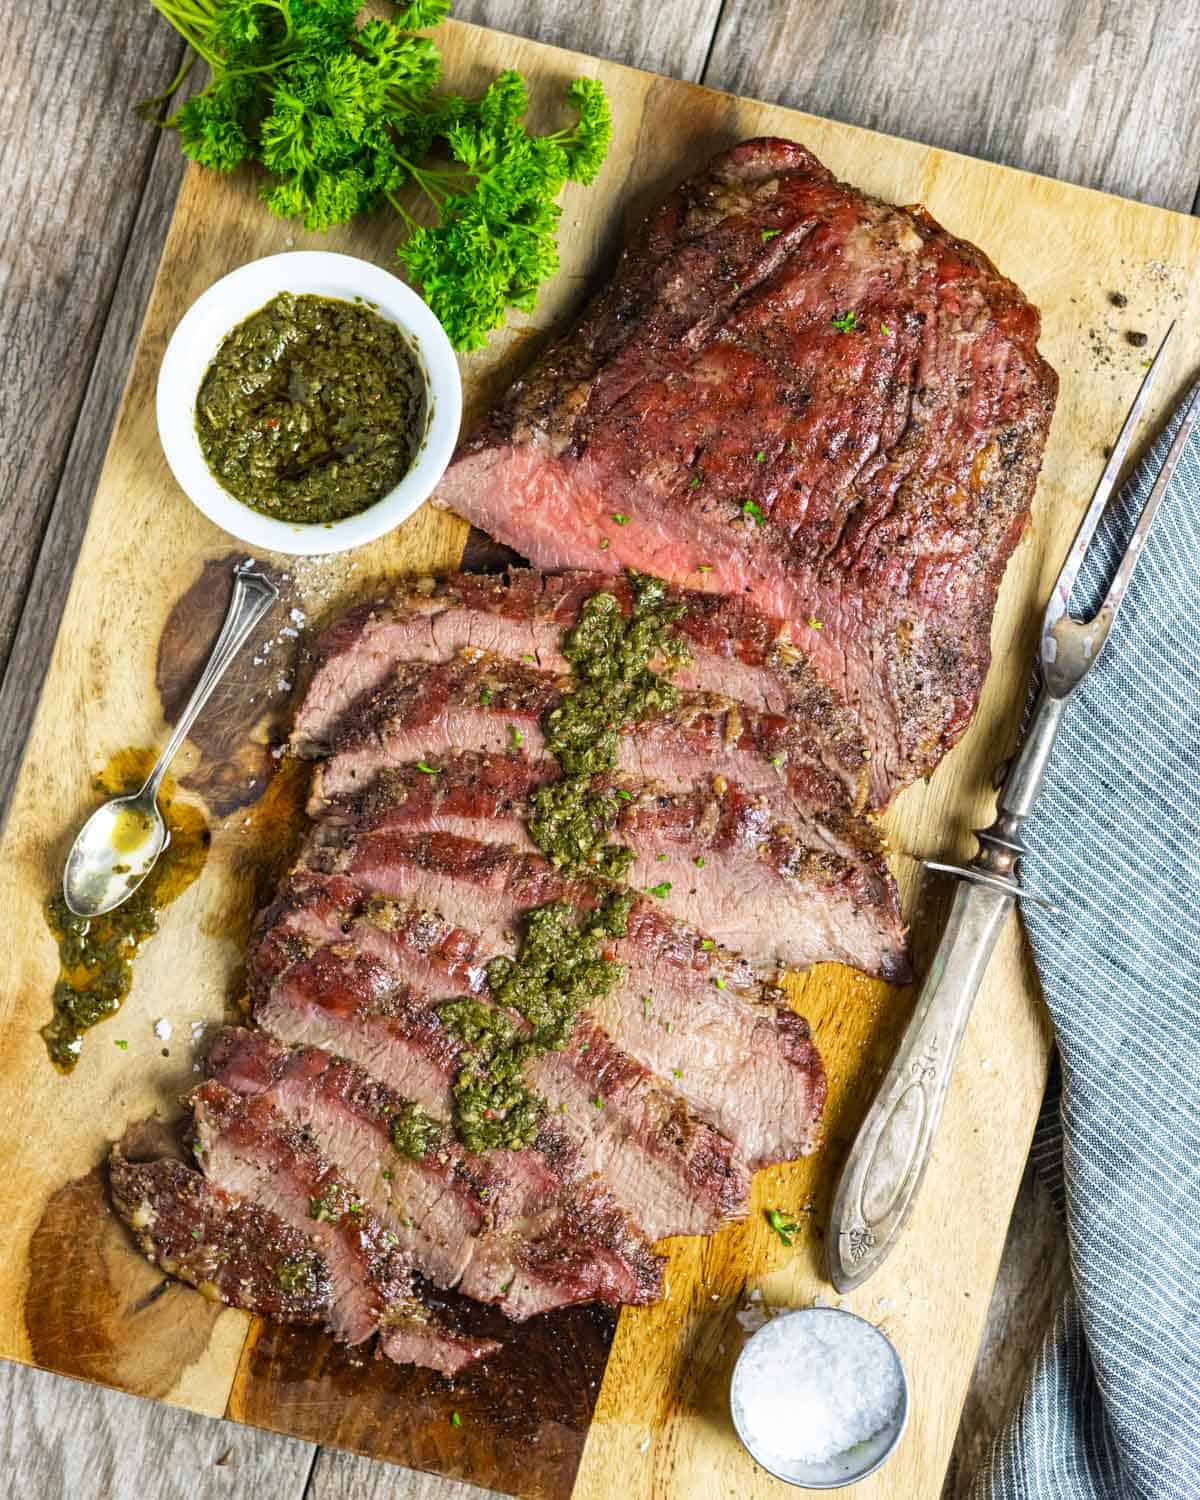 Smoked flank steak cut in layered thin slices on a board with Mexican chimichurri sauce spread down the center.